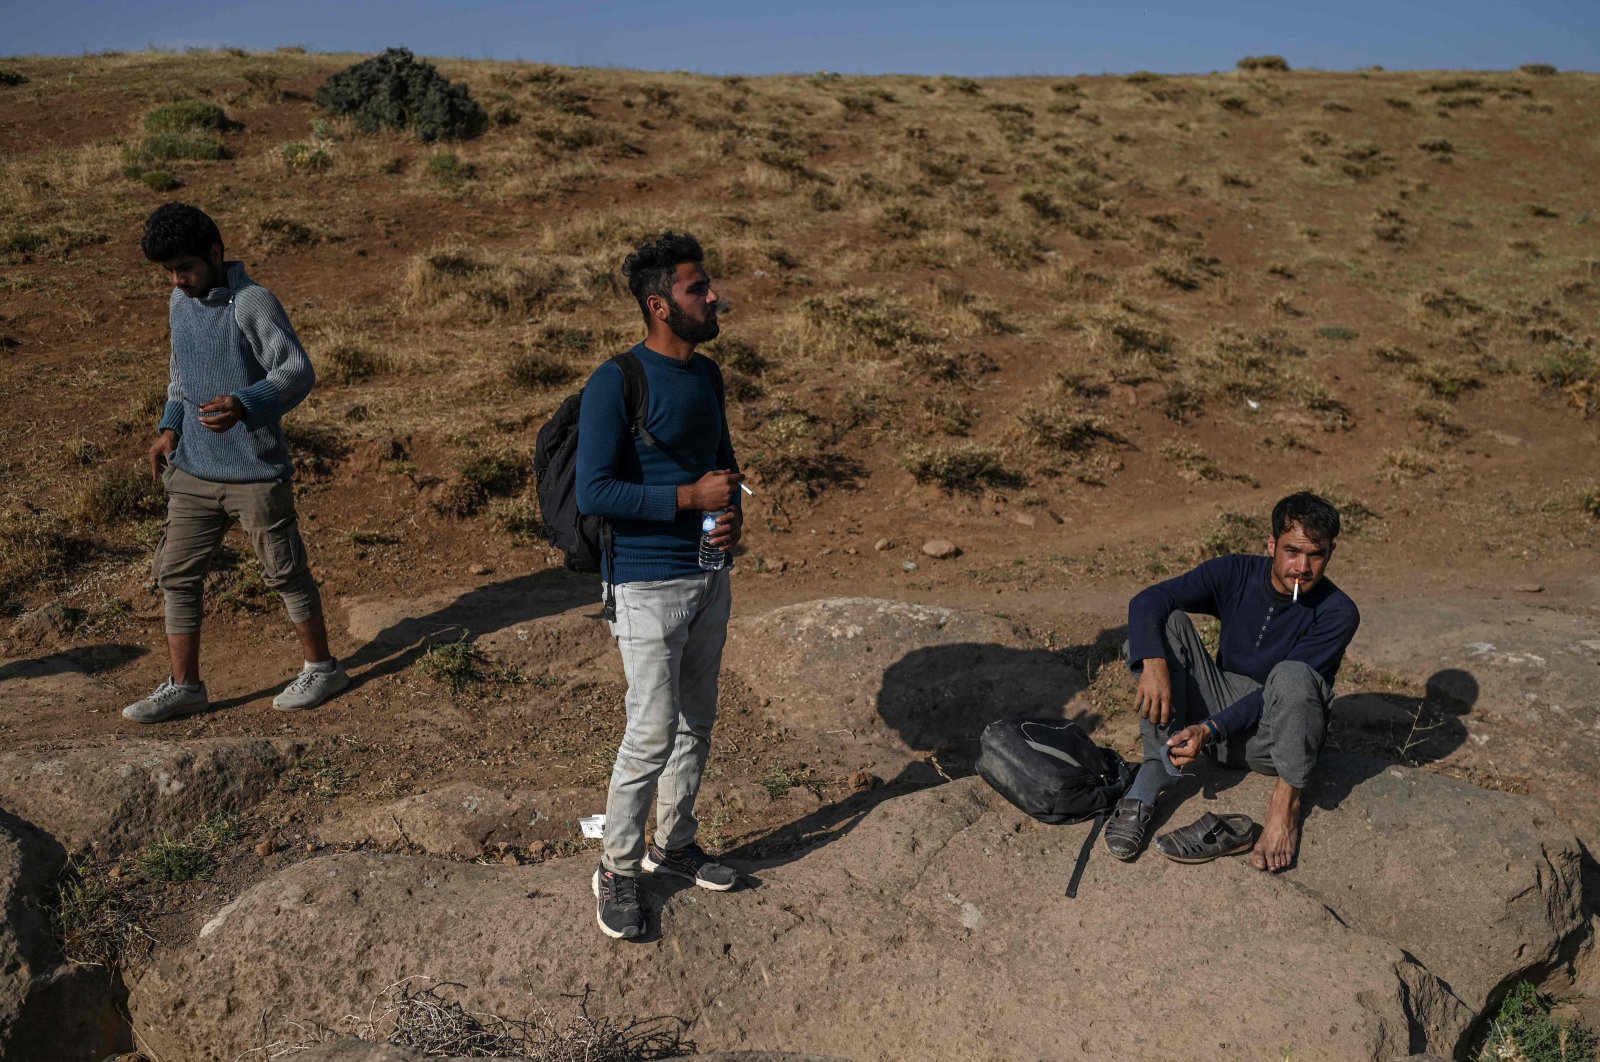 Afghan migrants rest while waiting for transport by smugglers after crossing the Iran-Turkish border on Aug. 15, 2021, in Tatvan, on the western shores of Lake Van, eastern Turkey. (Photo by Ozan KOSE / AFP)